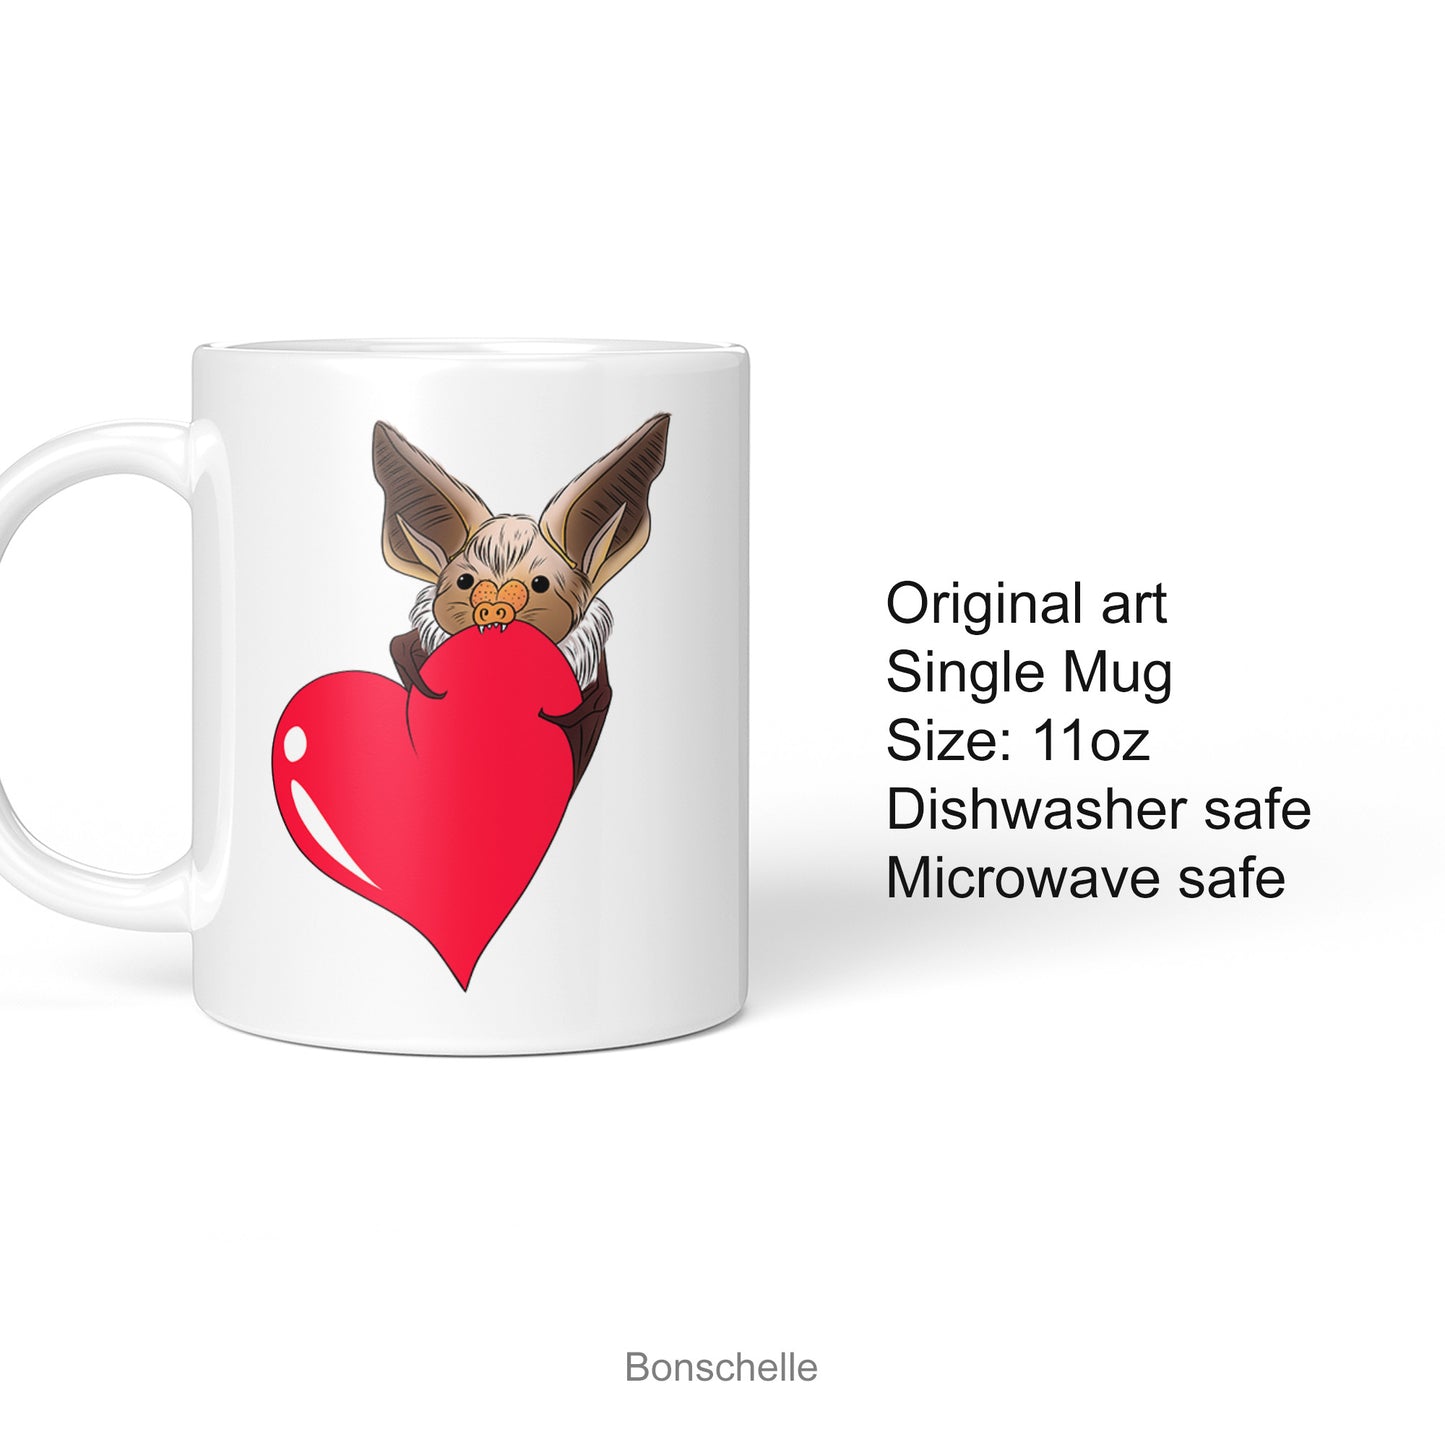 Product details for the Cute Bat holding a red love heart design mug.